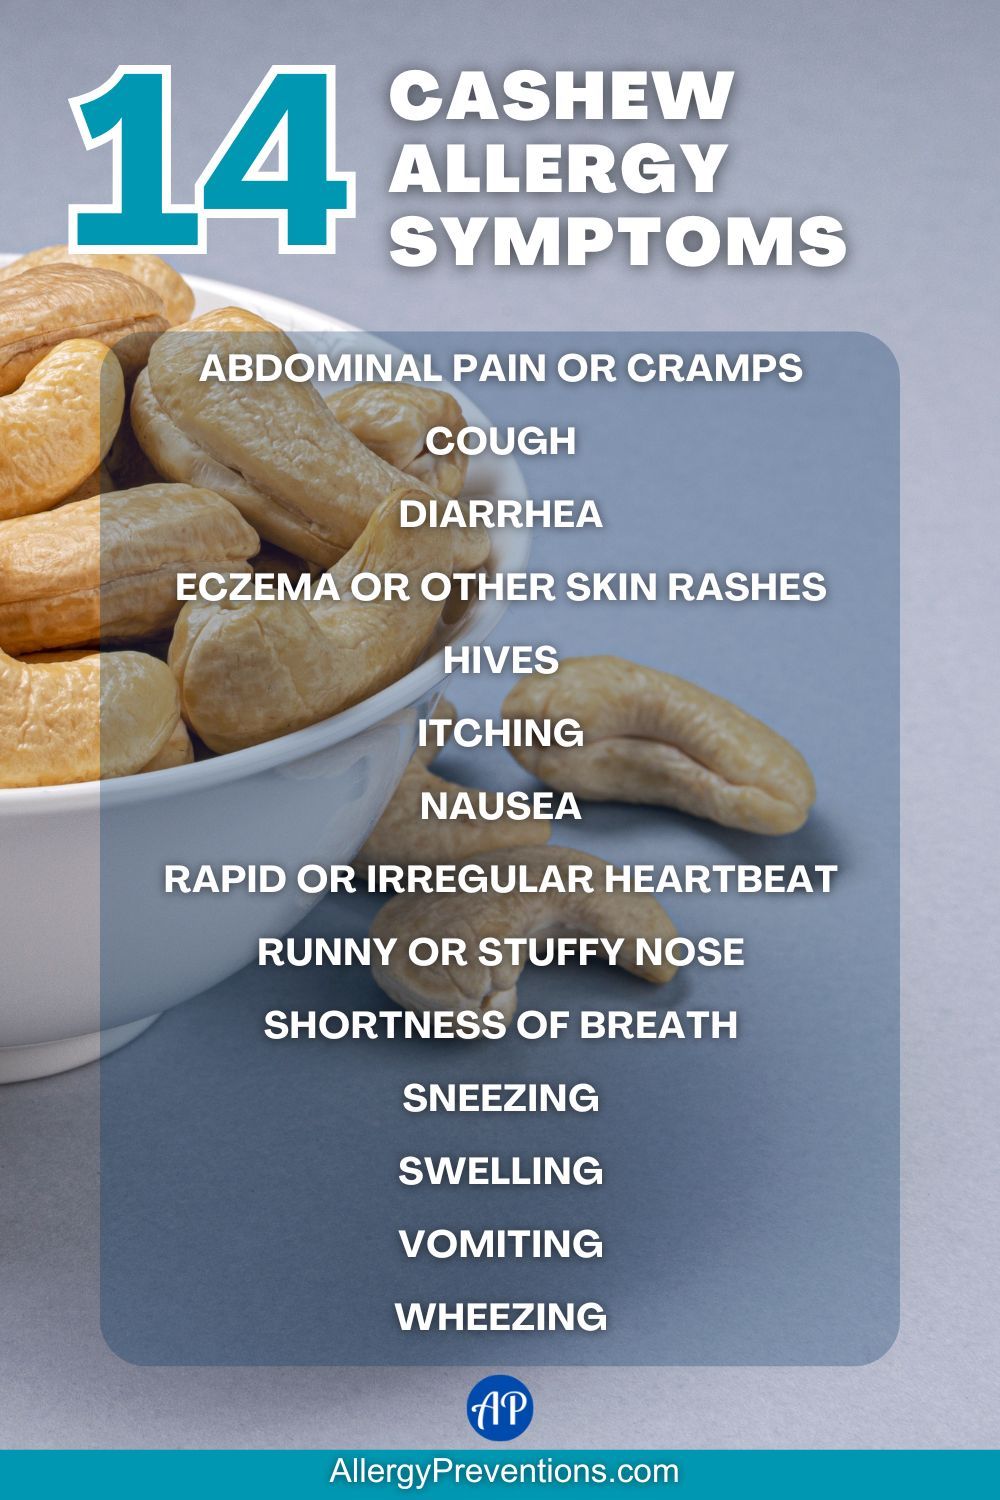 14 Cashew Allergy Symptoms Infographic: Abdominal pain or cramps, Cough, Diarrhea, Eczema or other skin rashes, Hives, Itching, Nausea, Rapid or irregular heartbeat, Runny or stuffy nose, Shortness of breath, Sneezing, Swelling, Vomiting, and Wheezing.